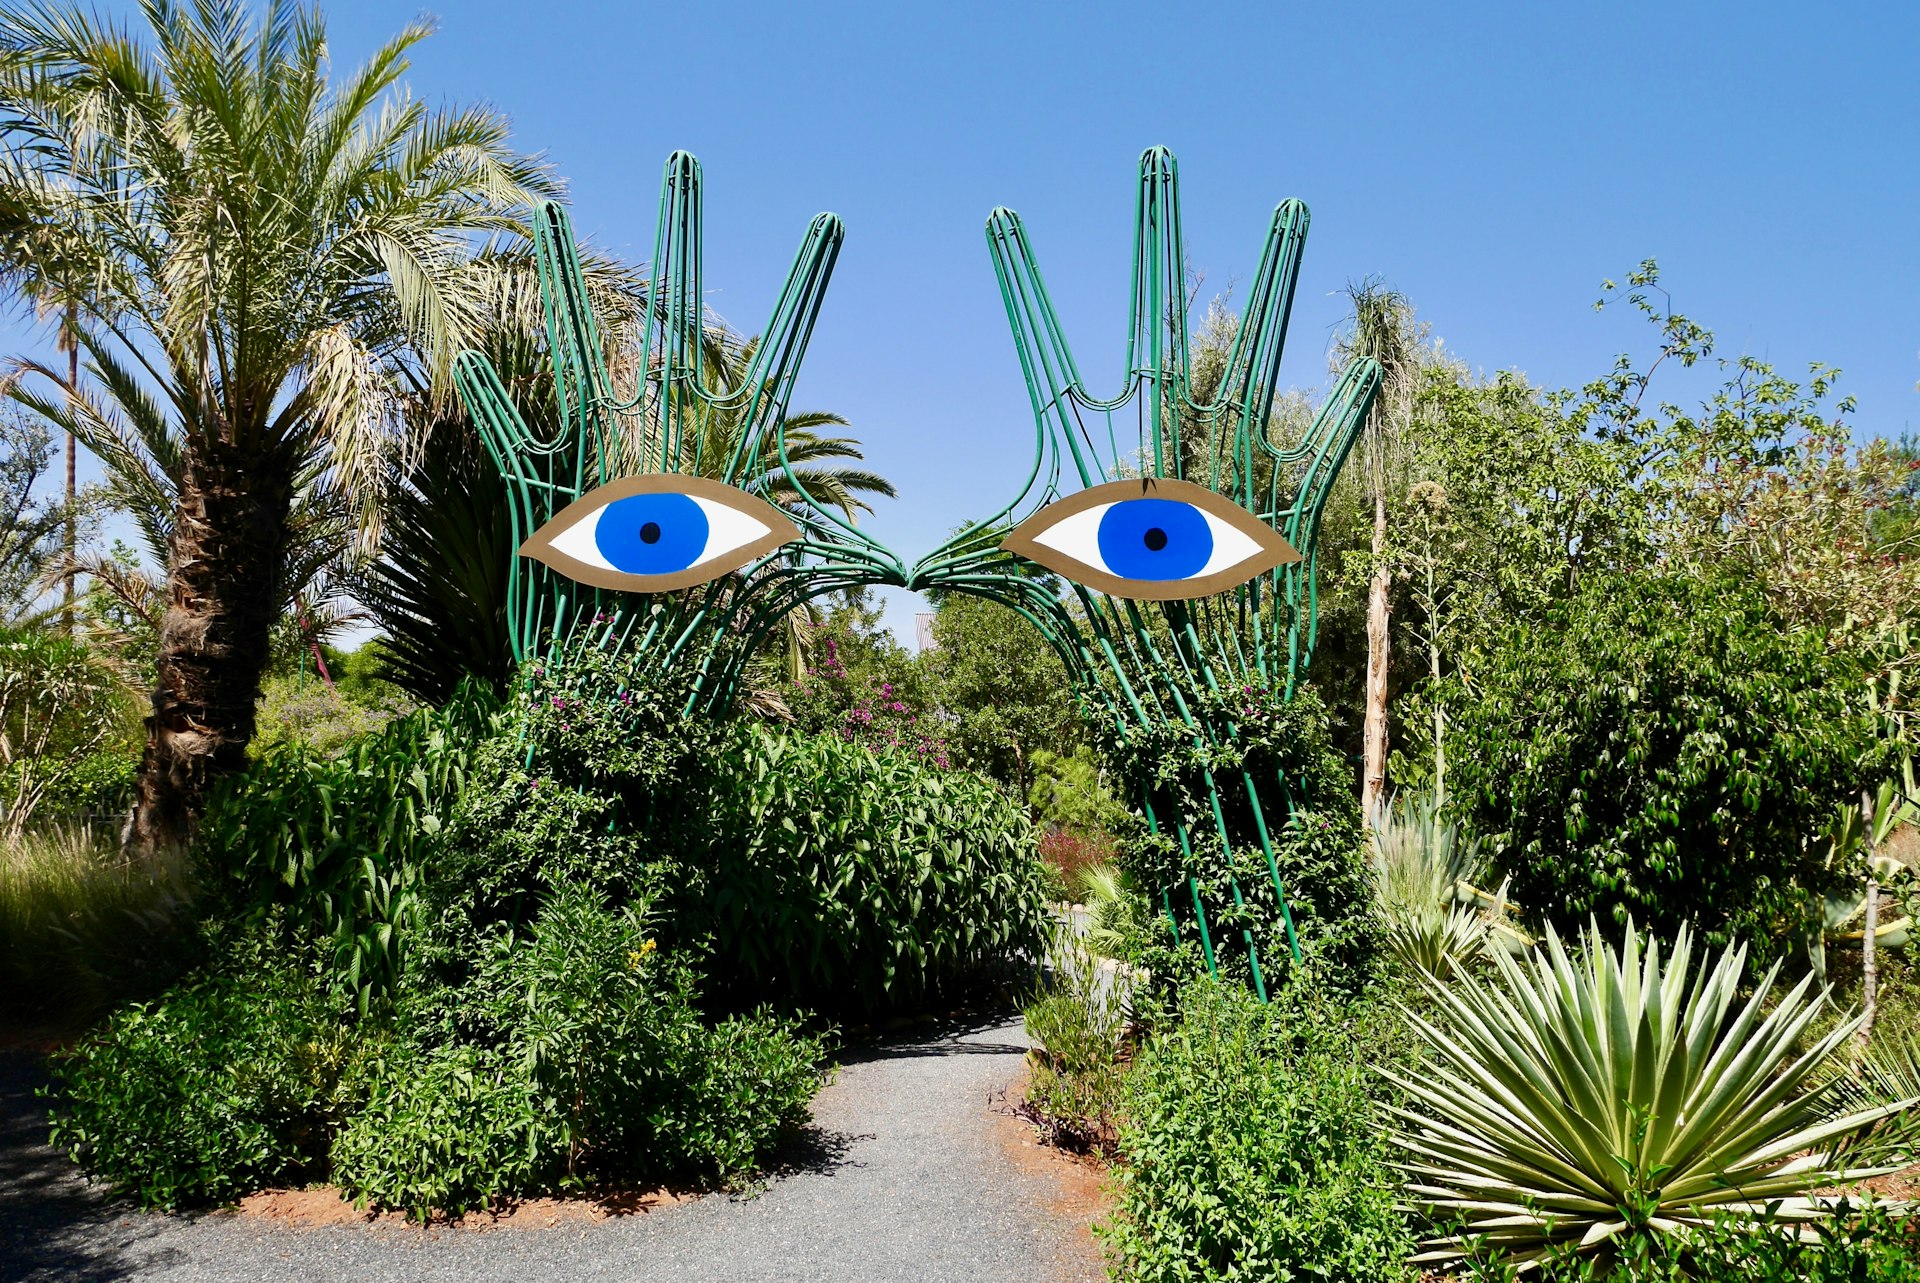 Two large hand sculptures topped with blue eyes guard a pathway in a botanical garden